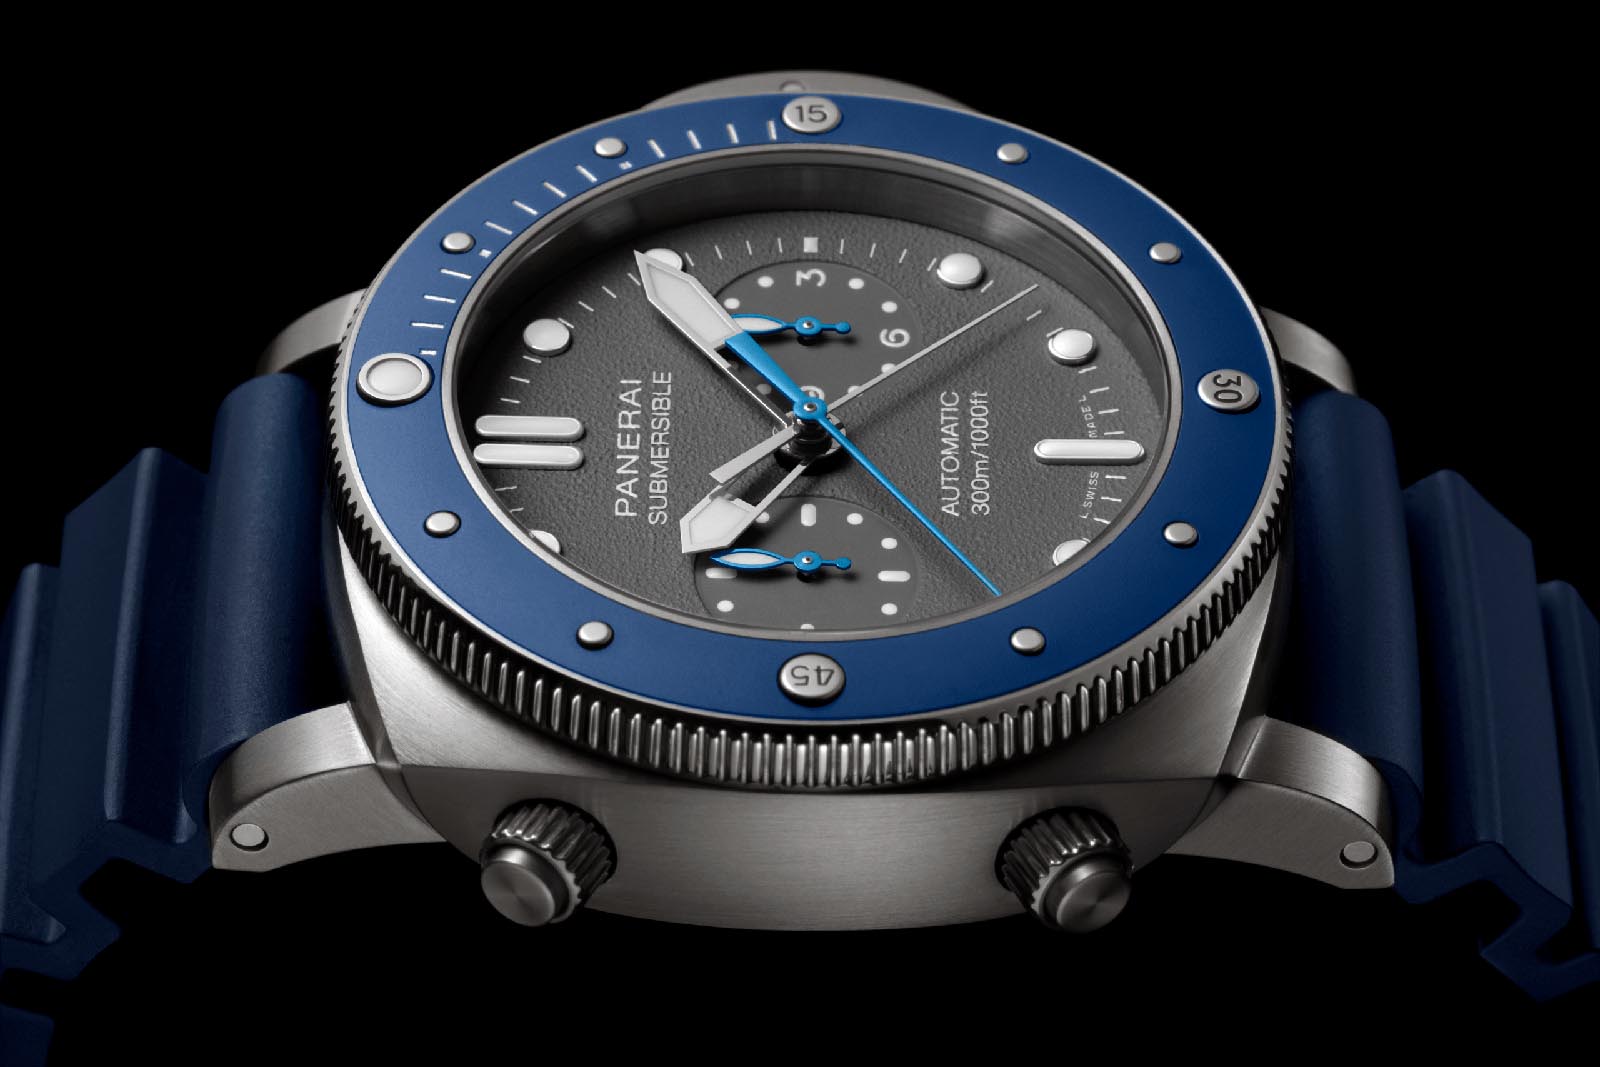 Panerai Submersible Chrono Guillaume Néry Edition PAM00982 2